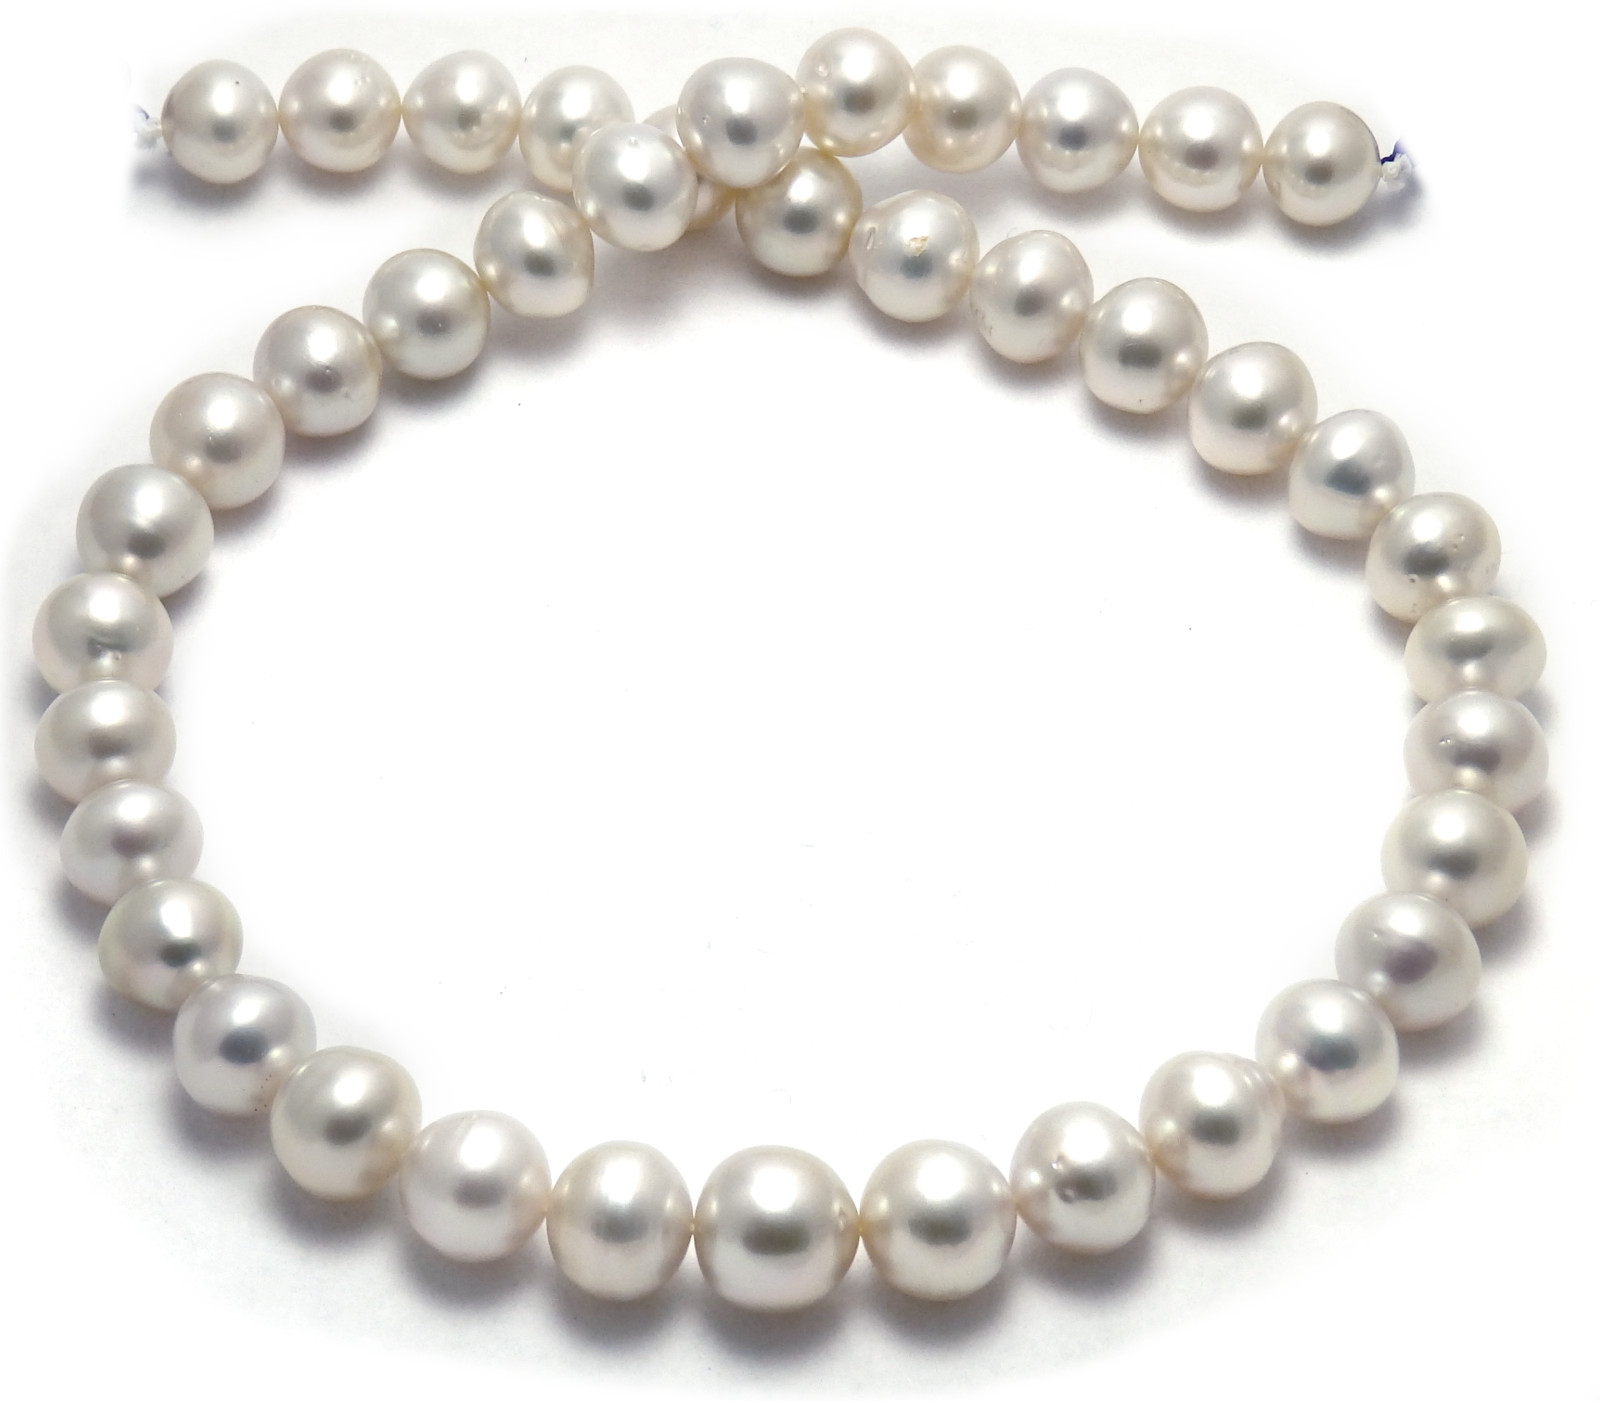 White South Sea Pearl Necklace with Round-ish Semi Baroque and Oval Pearls